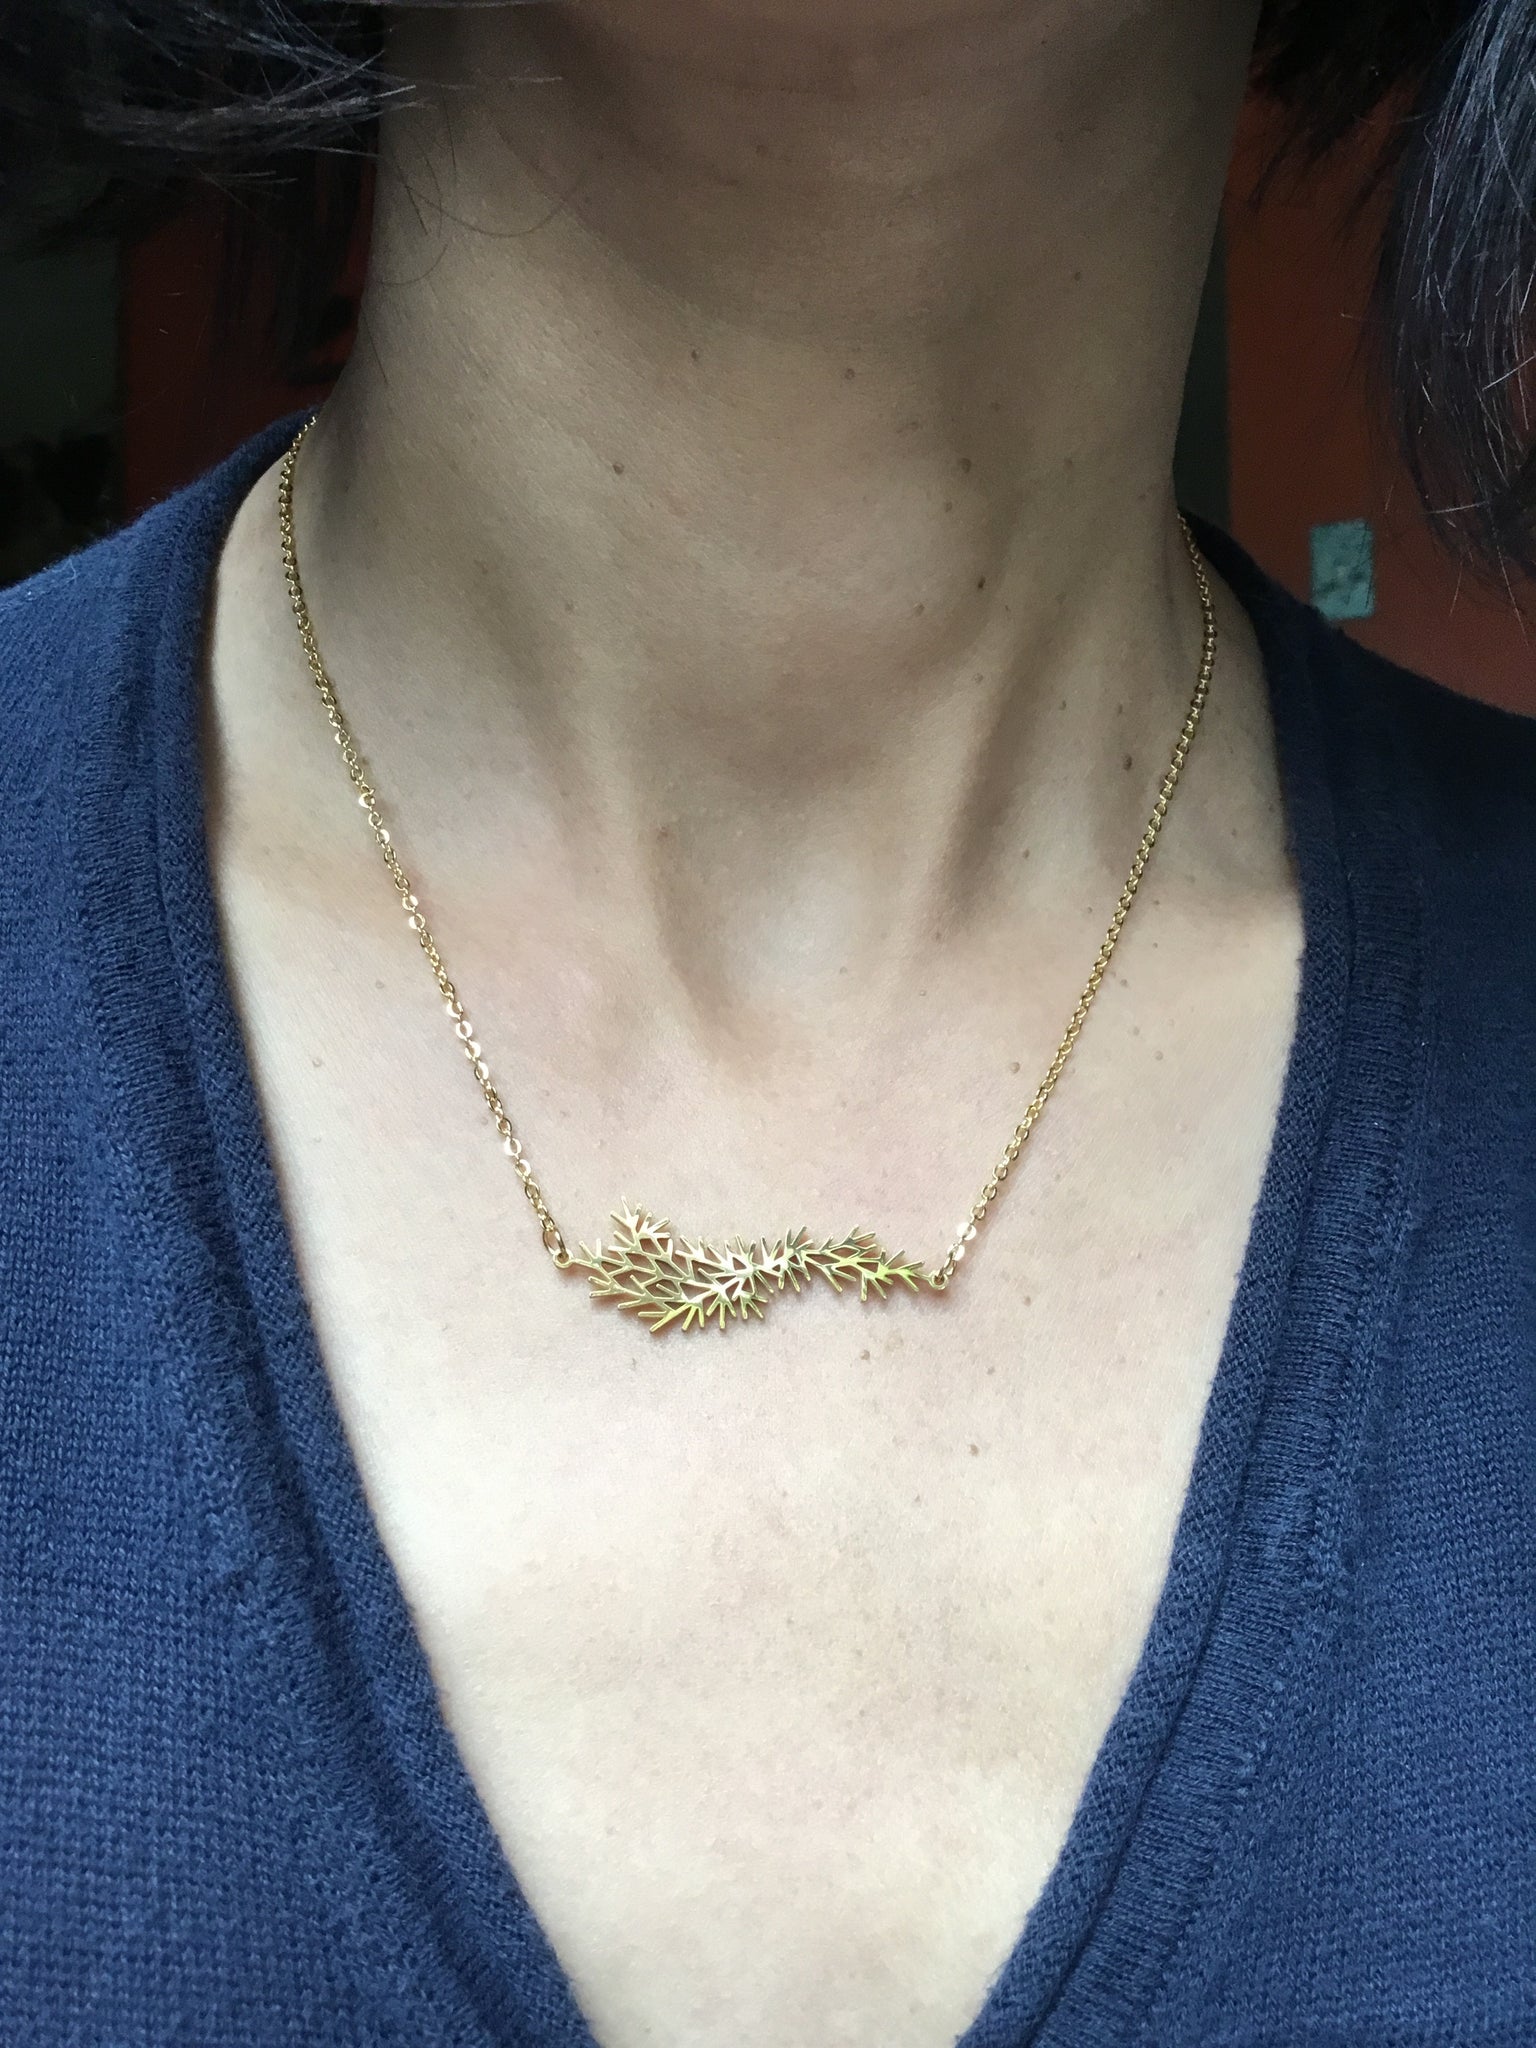 Evergreen branch pendant necklace